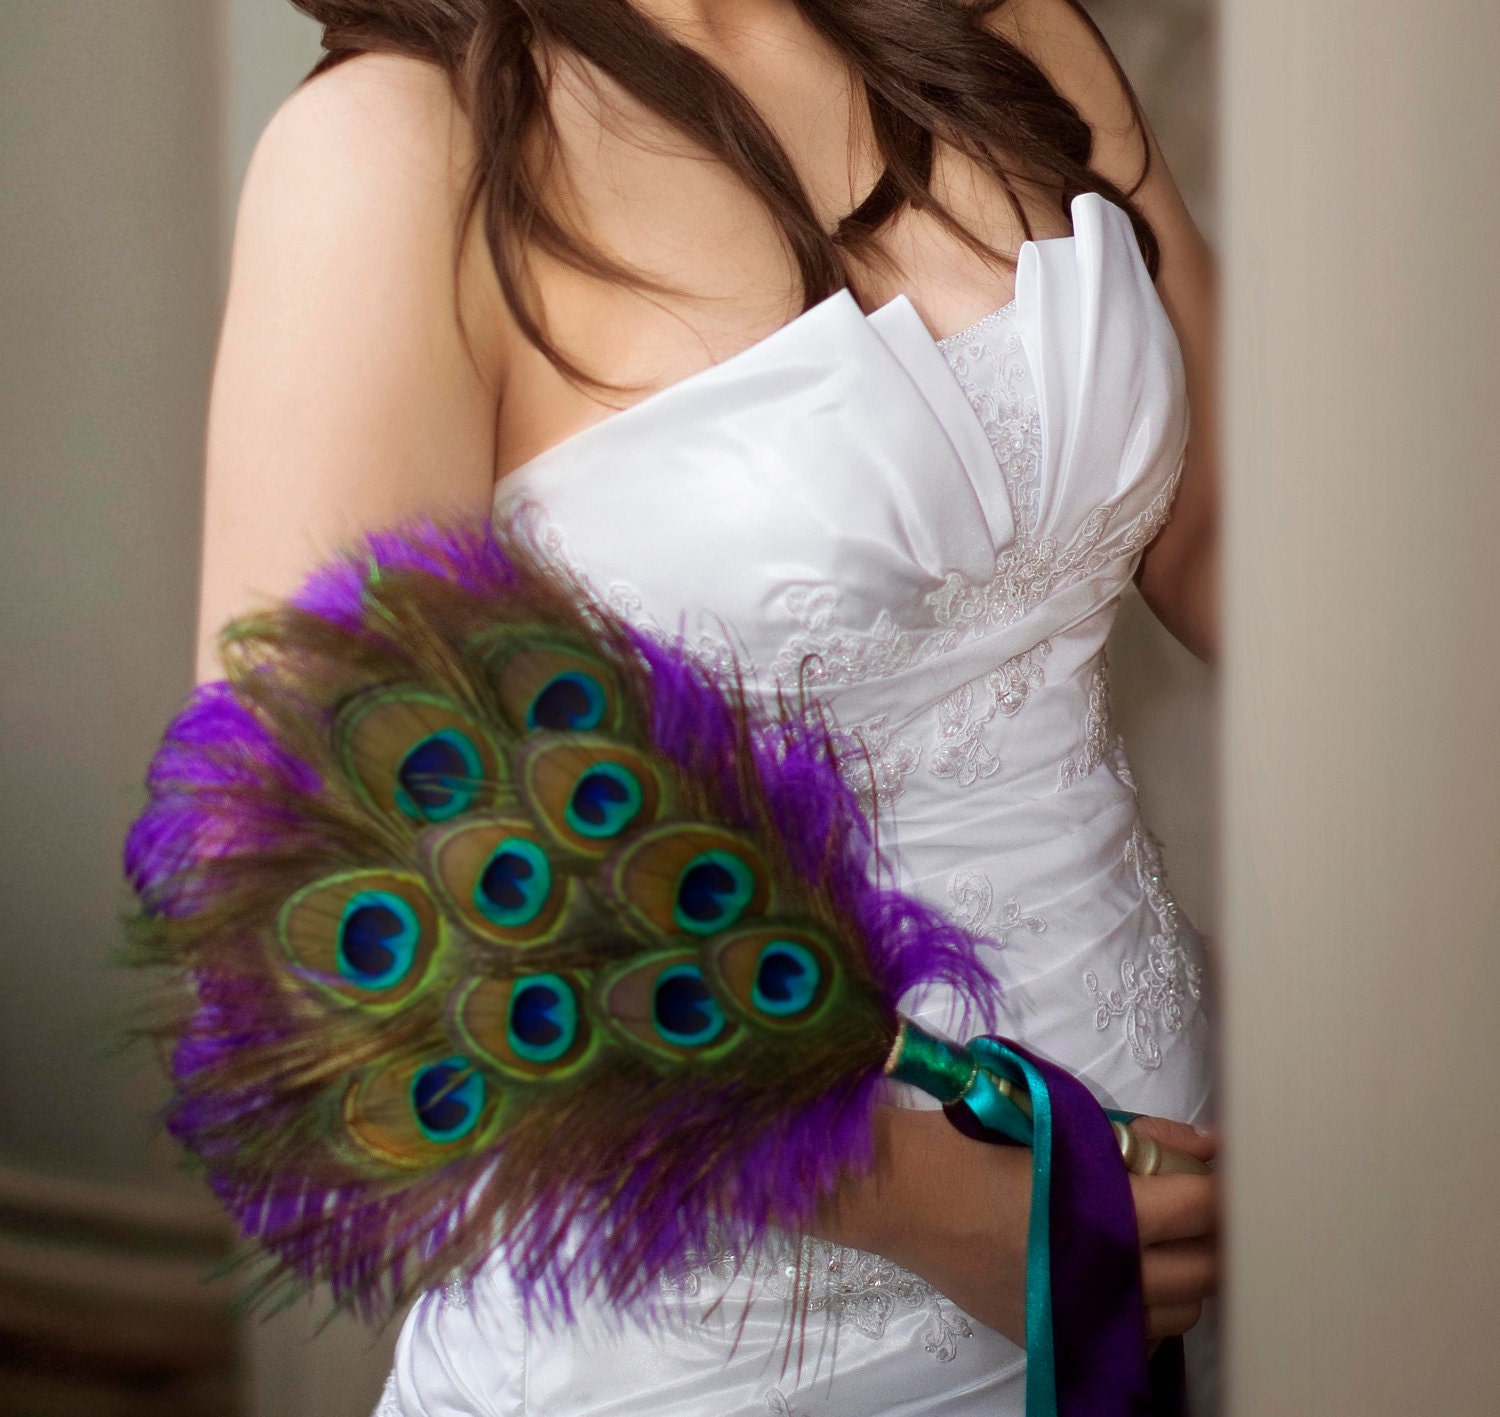 SAMPLE SALE - Christine - Peacock and Purple Ostrich Feather Bridal Wedding Fan Bouquet